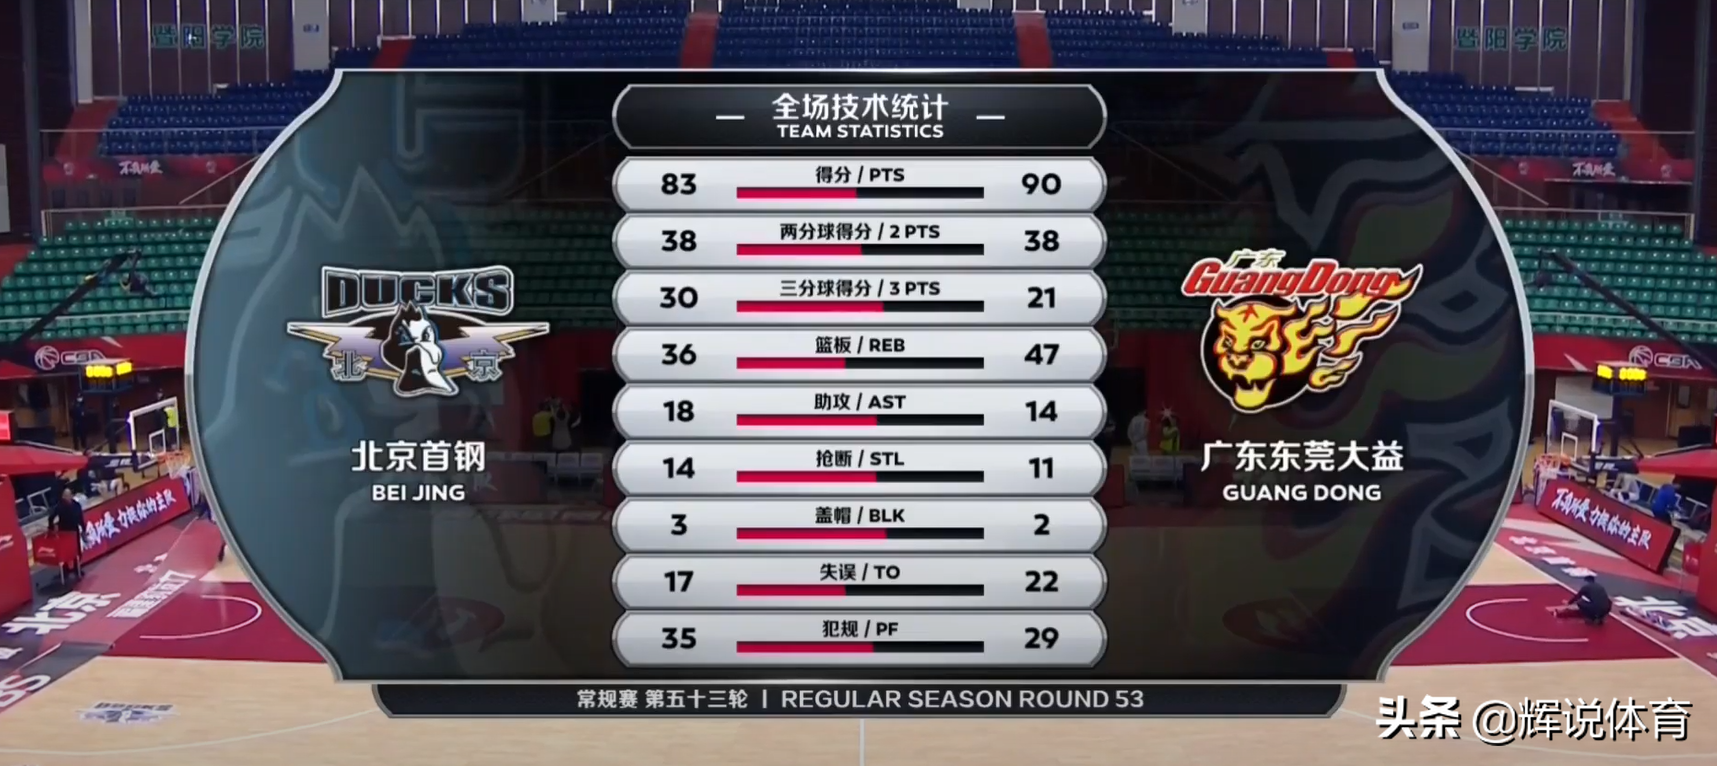 Zhao Rui minor details casts a key 3 minutes, thompson 3 minutes, guangdong 90-83 force overcomes Beijing head steel